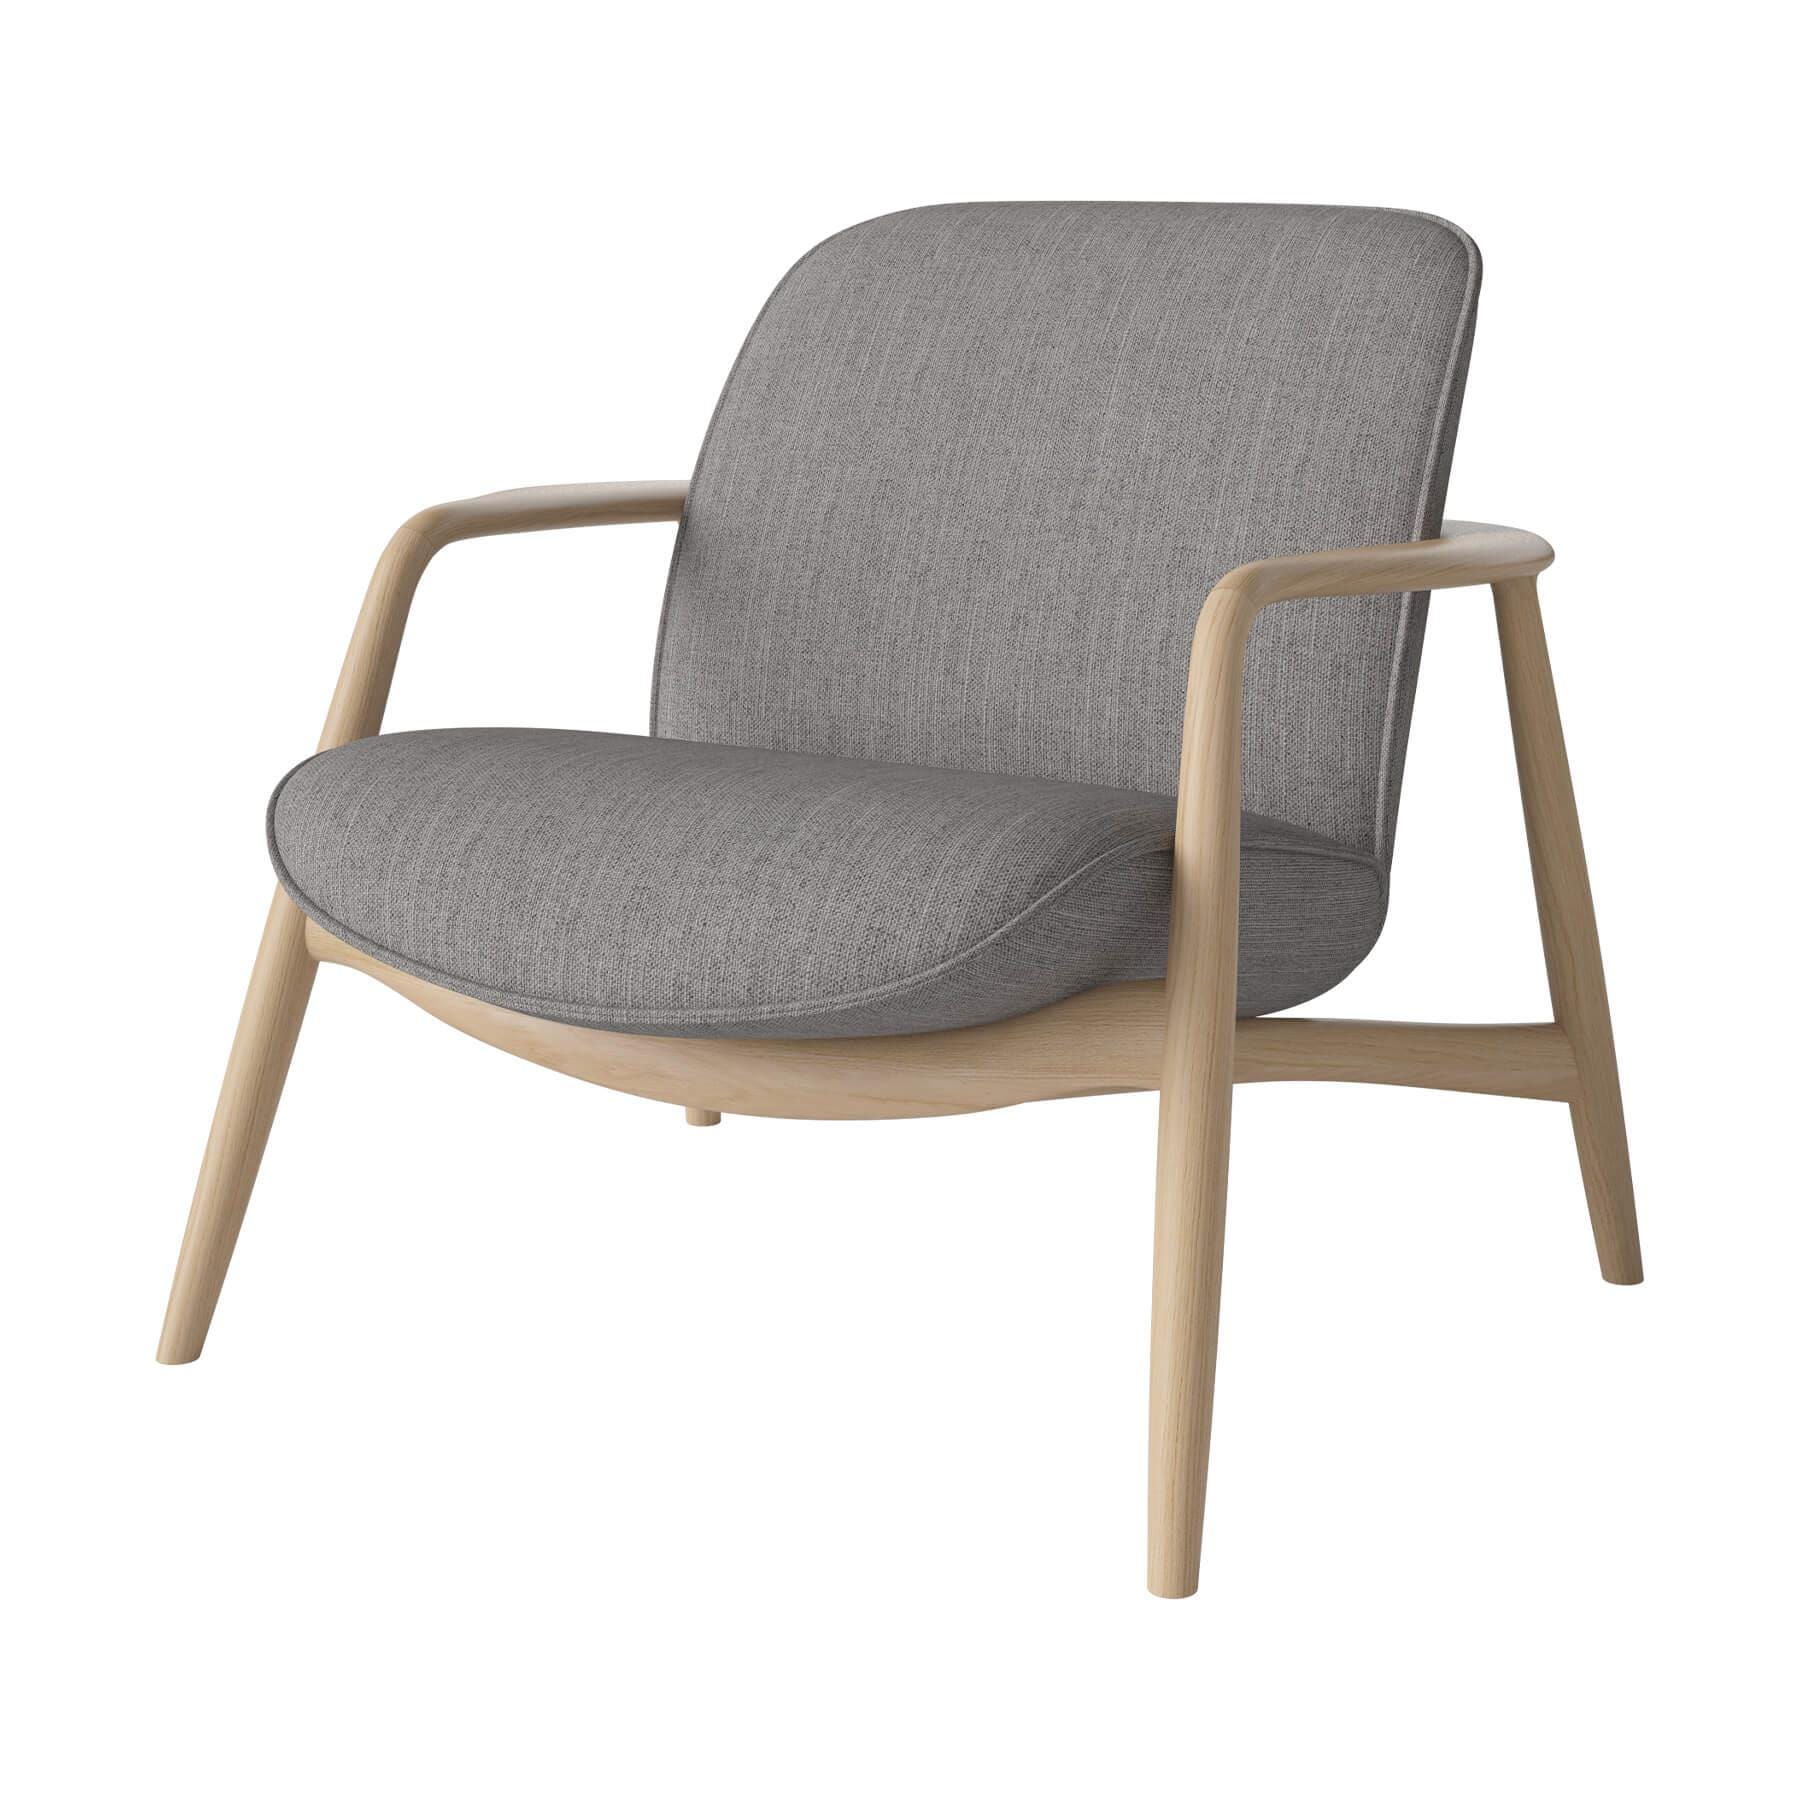 Bolia Bowie Armchair White Oiled Oak Baize Grey Designer Furniture From Holloways Of Ludlow